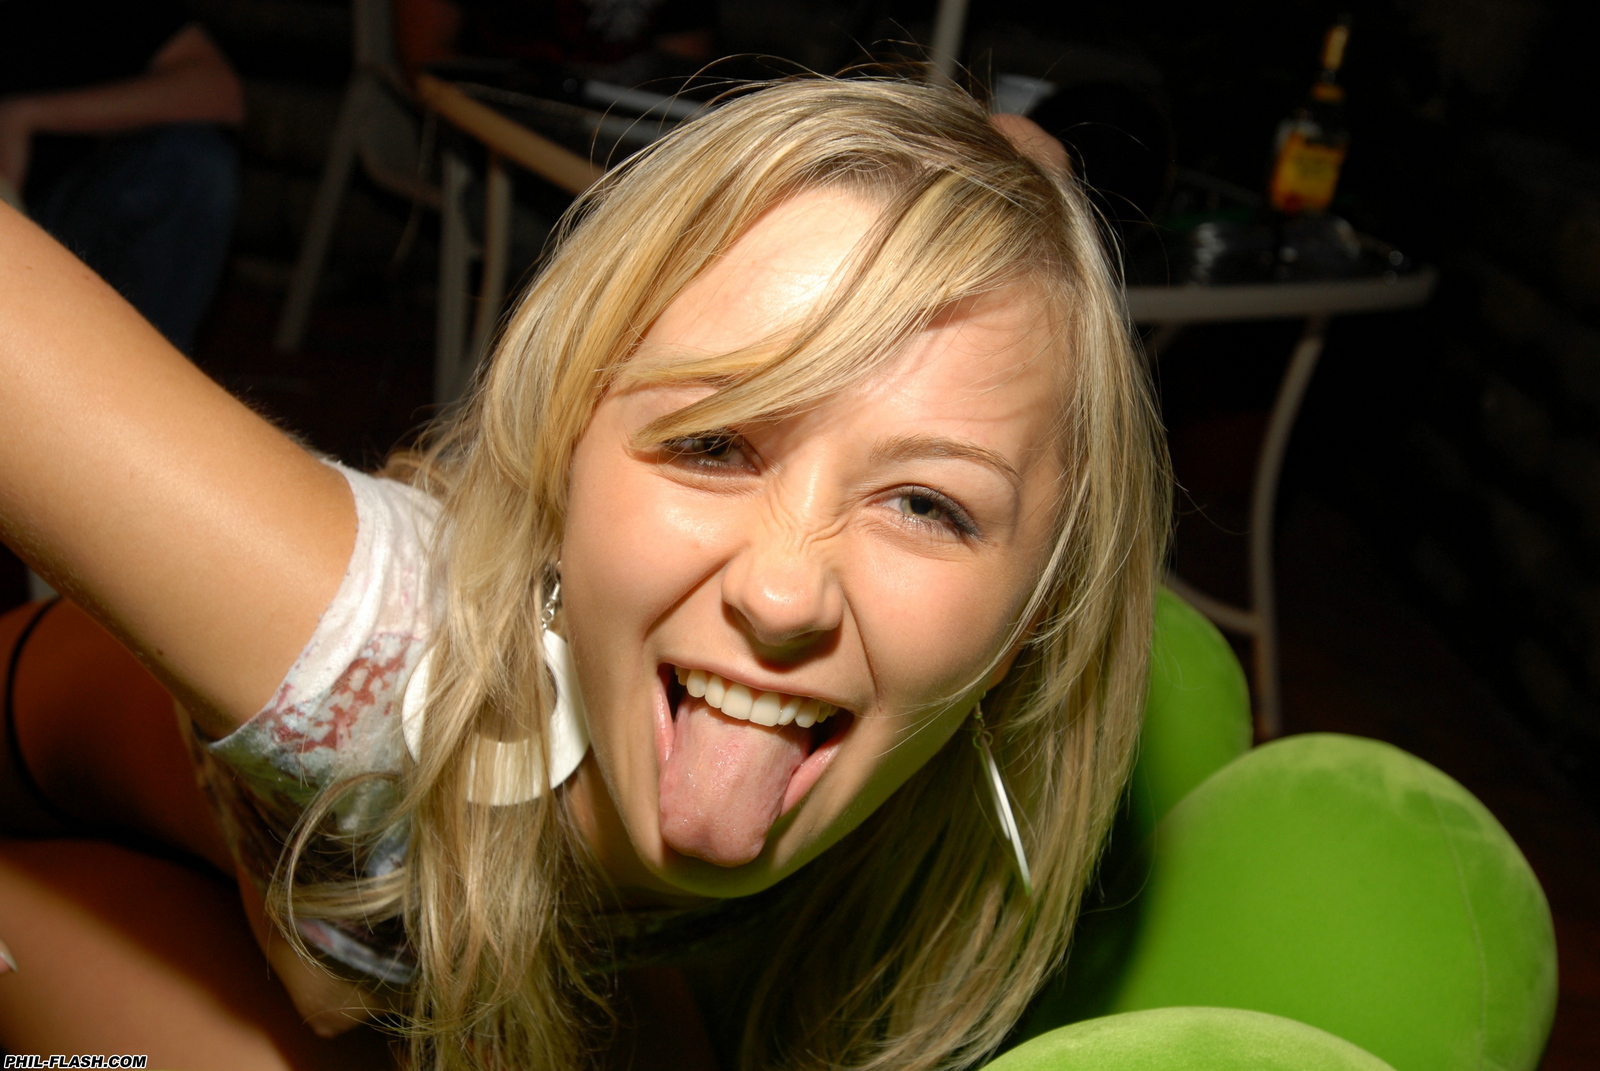 kasia-naked-teen-drinking-alcohol-young-blonde-pussy-phil-flash-21